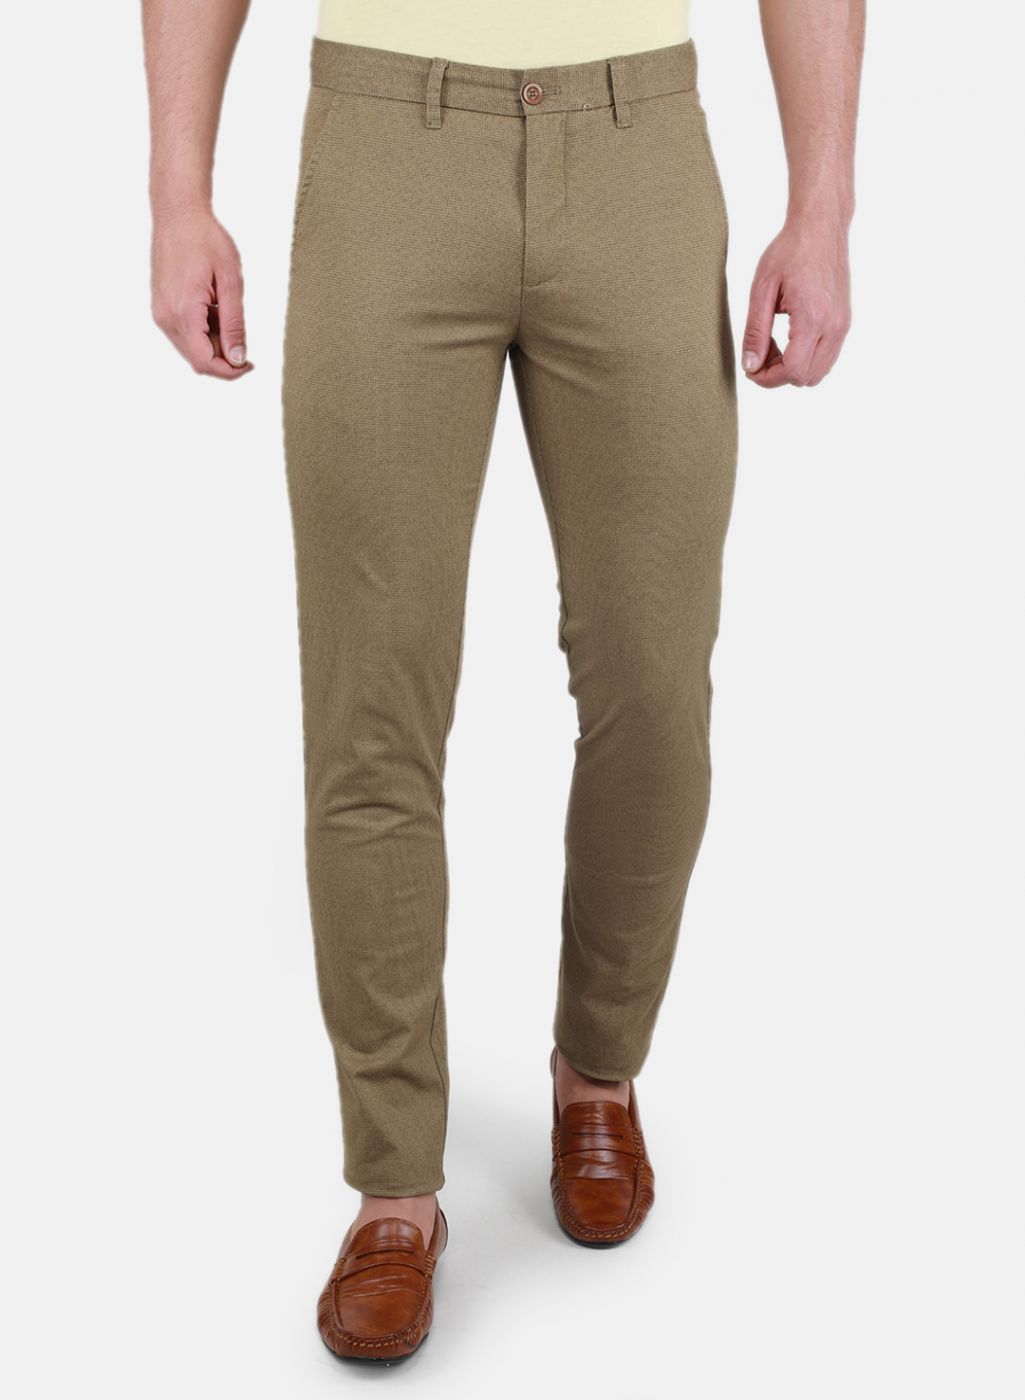 Tailored Fit Light Grey Donegal Trousers | Buy Online at Moss